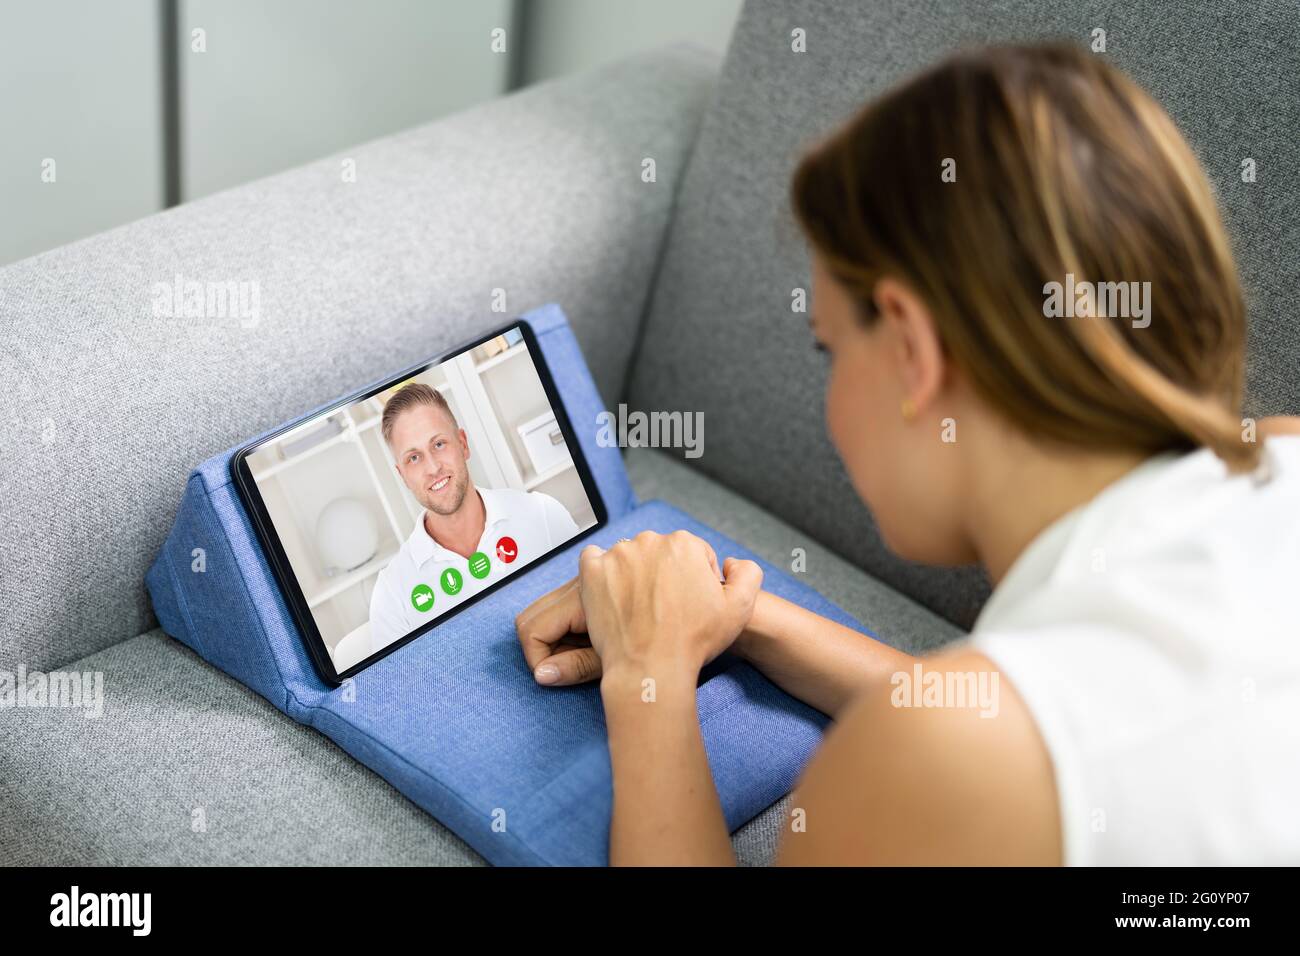 Woman Video Chat On Tablet Using Webcam Stock Photo